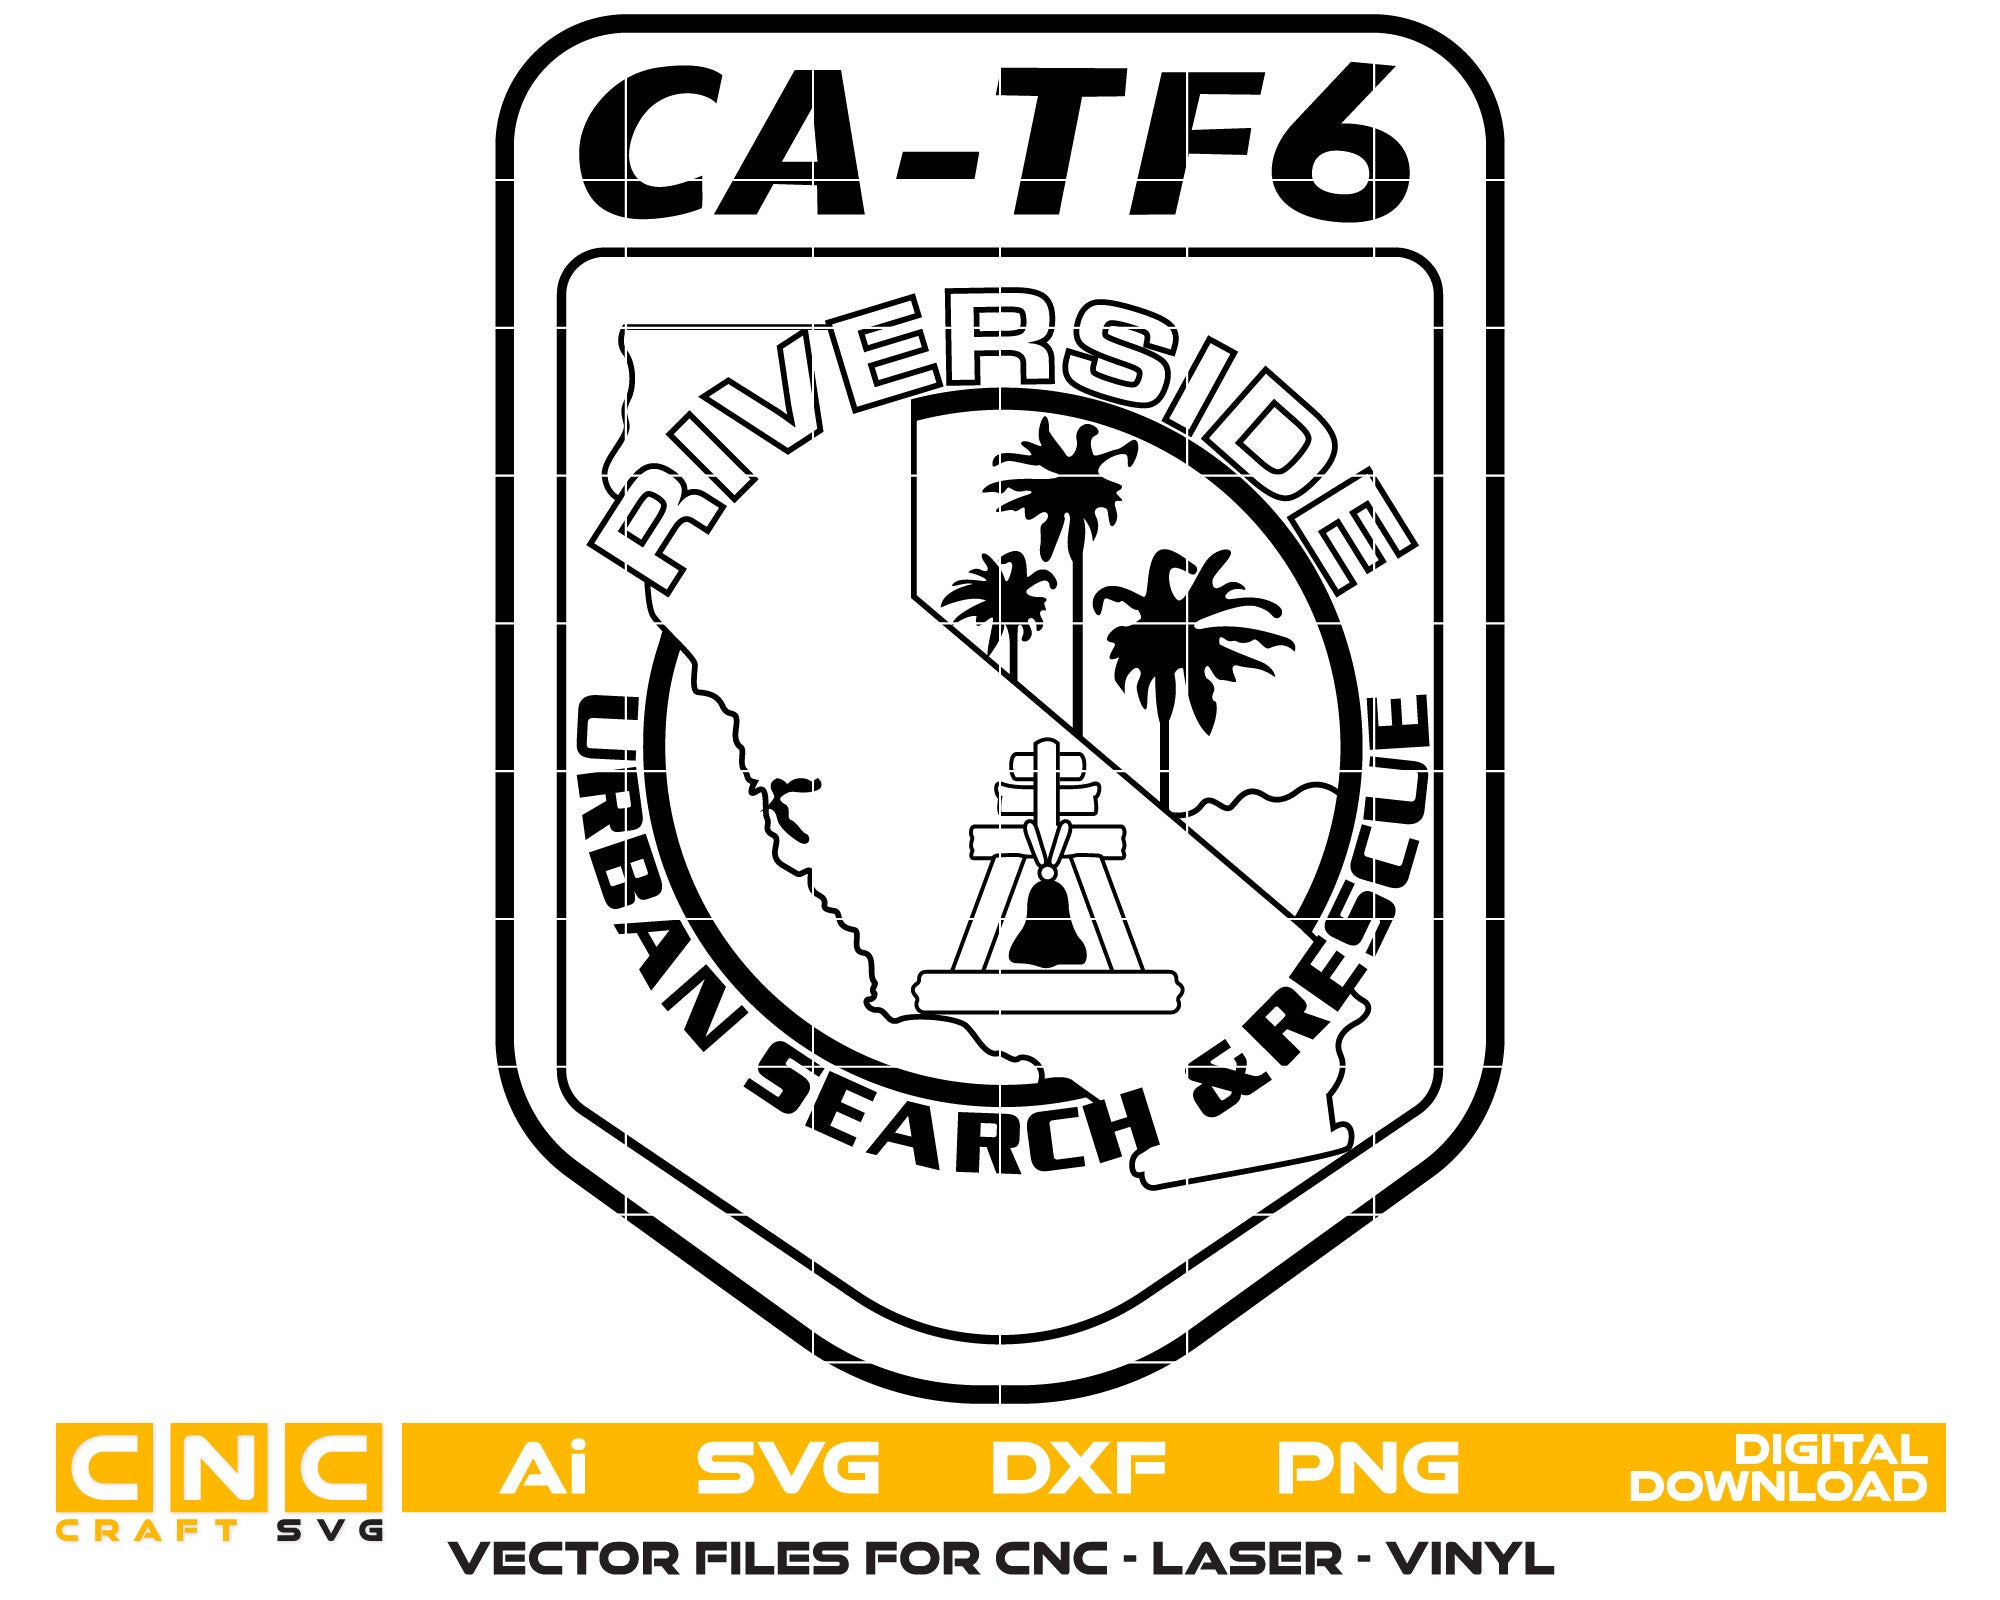 Riverside Urban Search and Rescue Vector Art, Ai,SVG, DXF, PNG, Digital Files